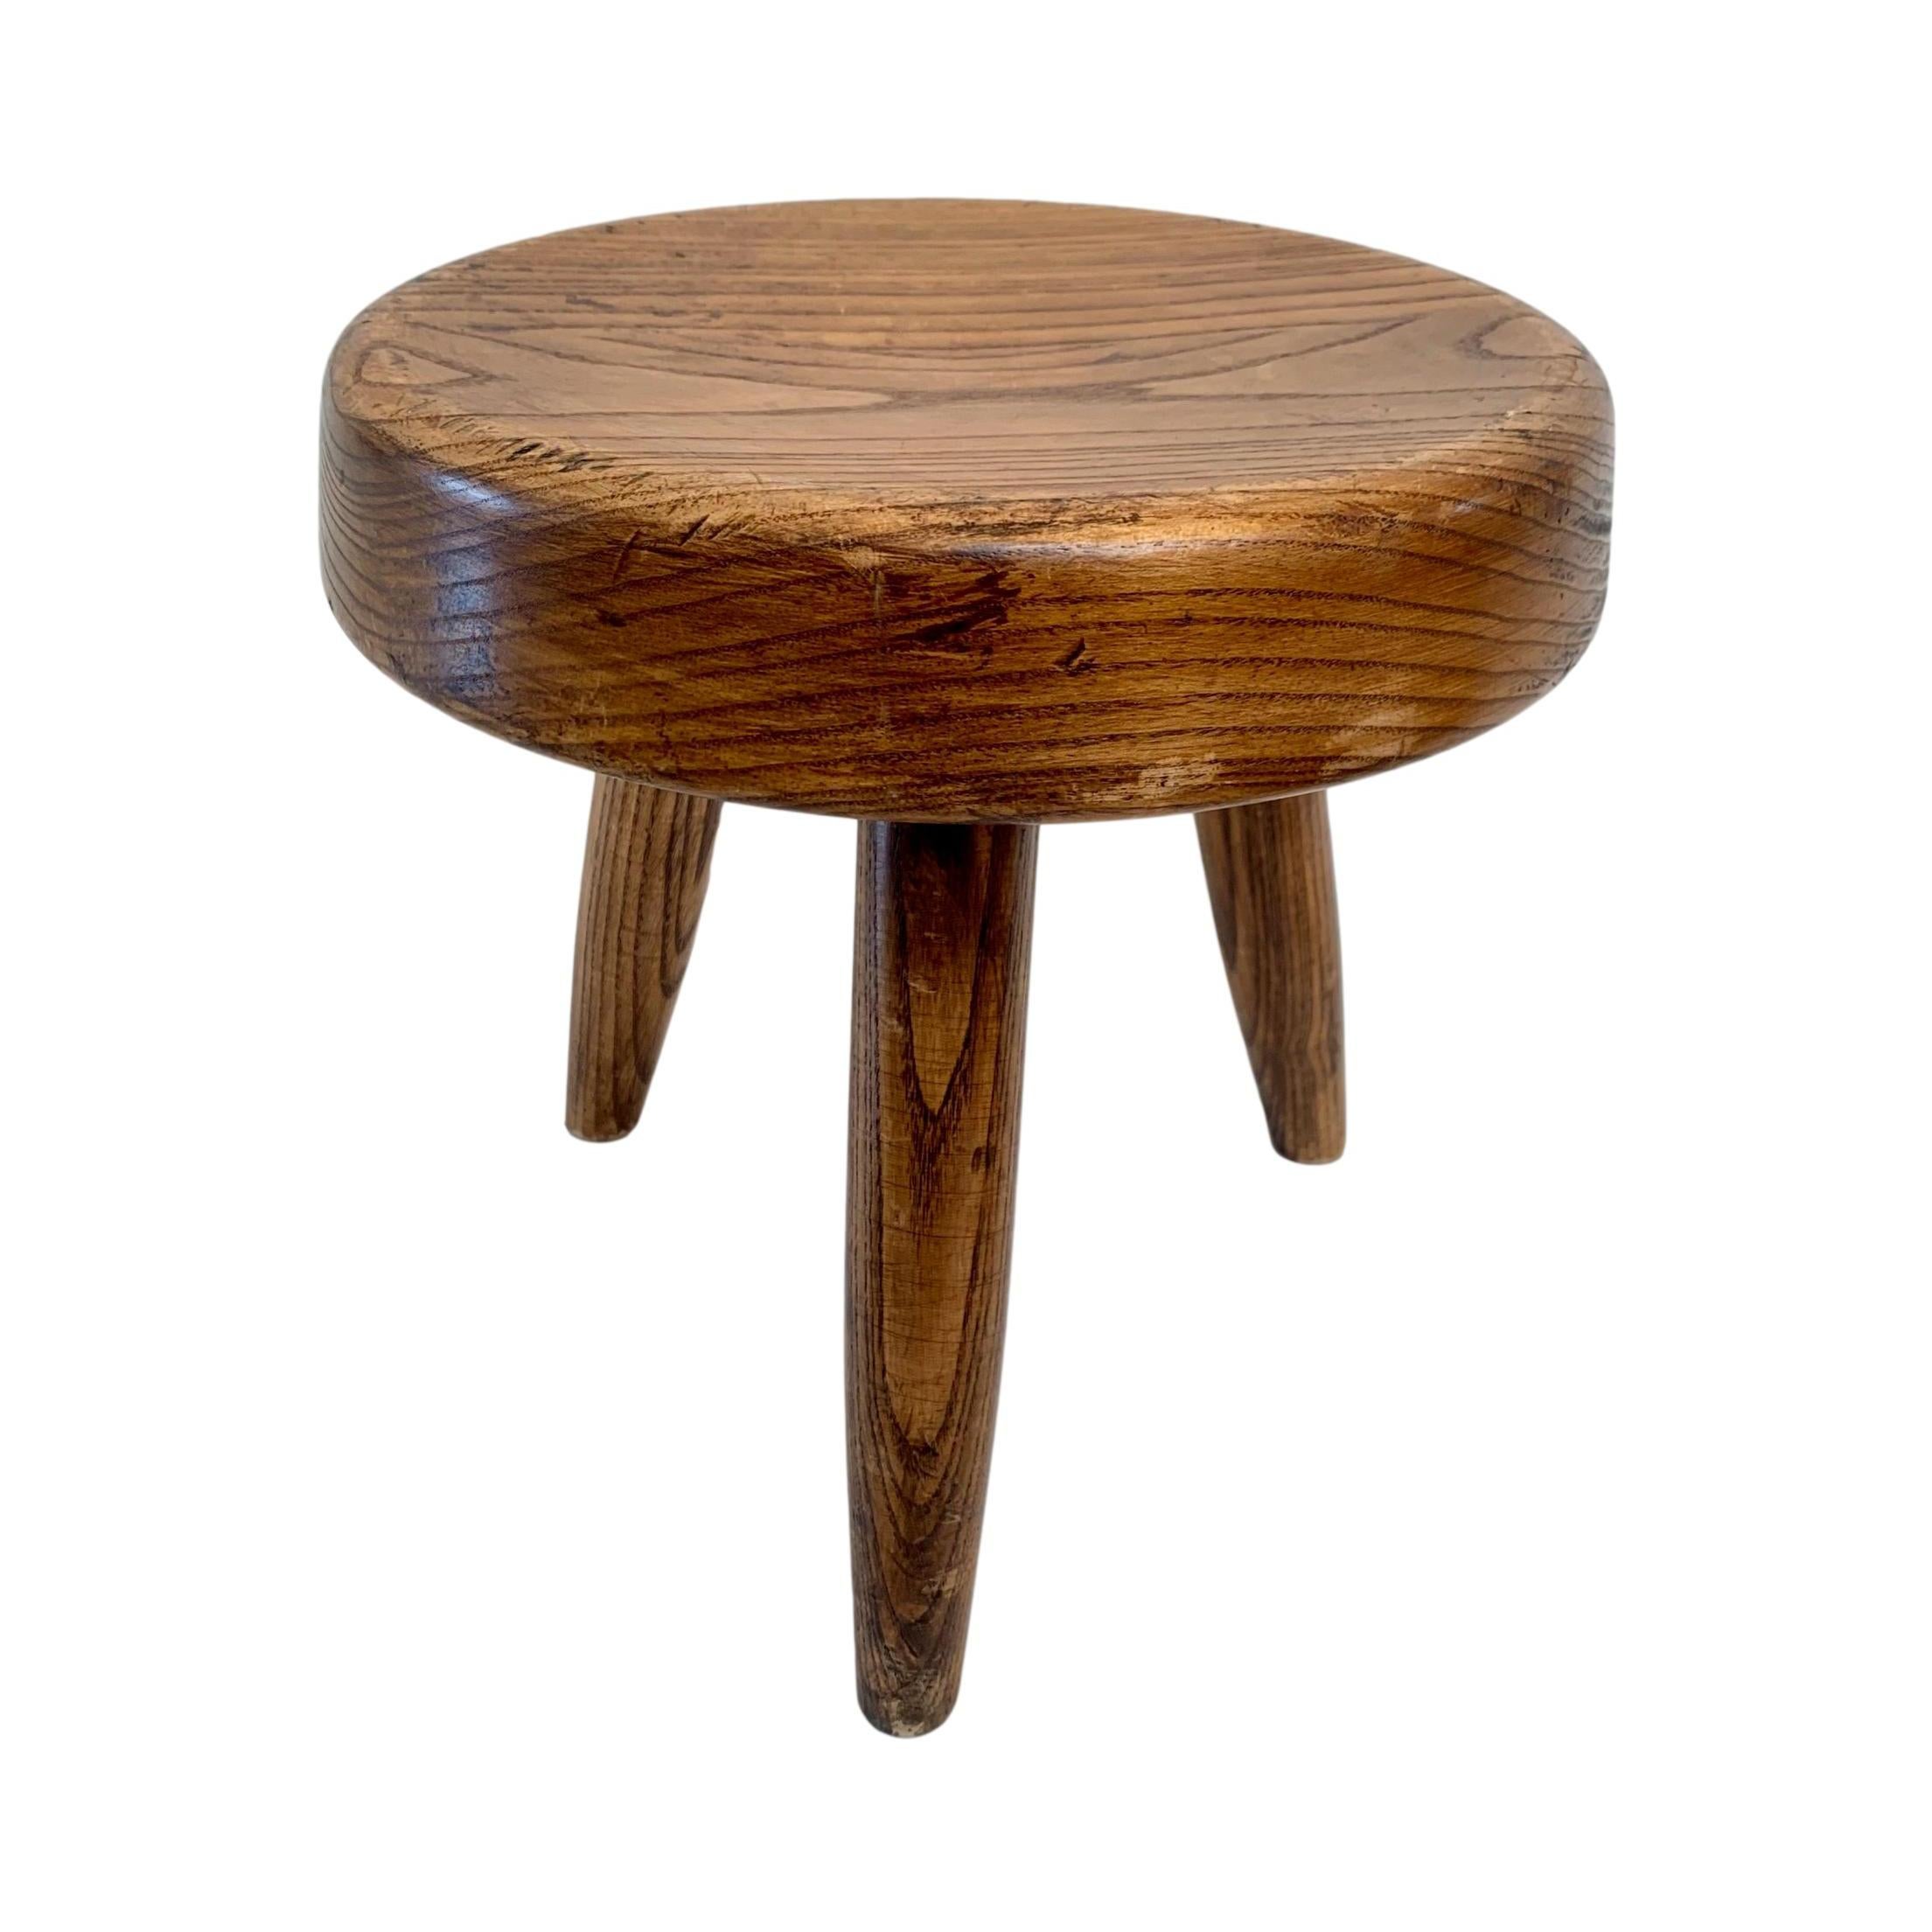 Charlotte Perriand Berger Stool